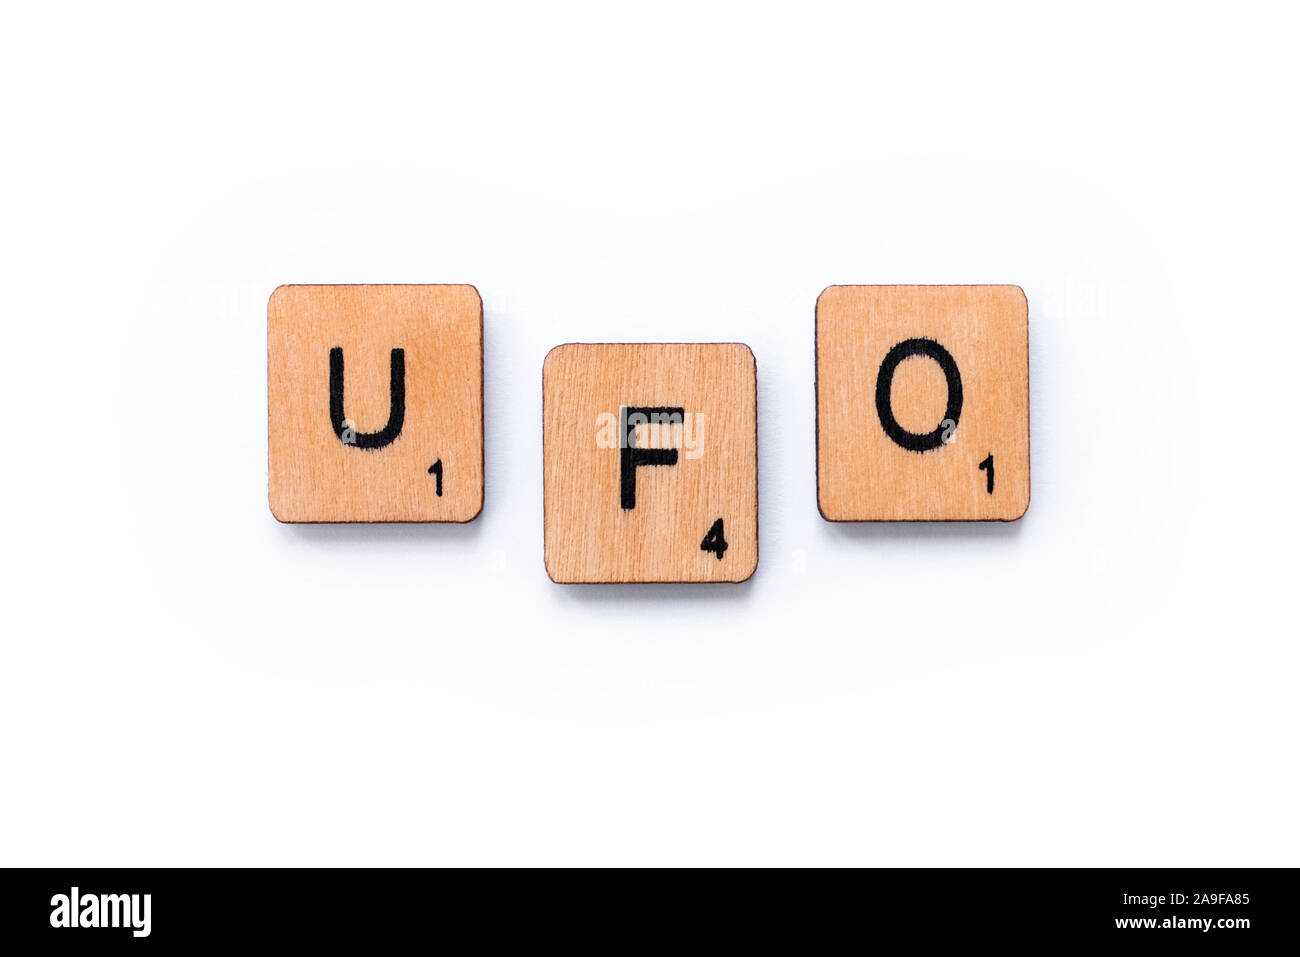 London, UK - June 12th 2019: The abbreviation UFO which stands for Unidentified Flying Object, spelt with wooden letter tiles over a white background. Stock Photo